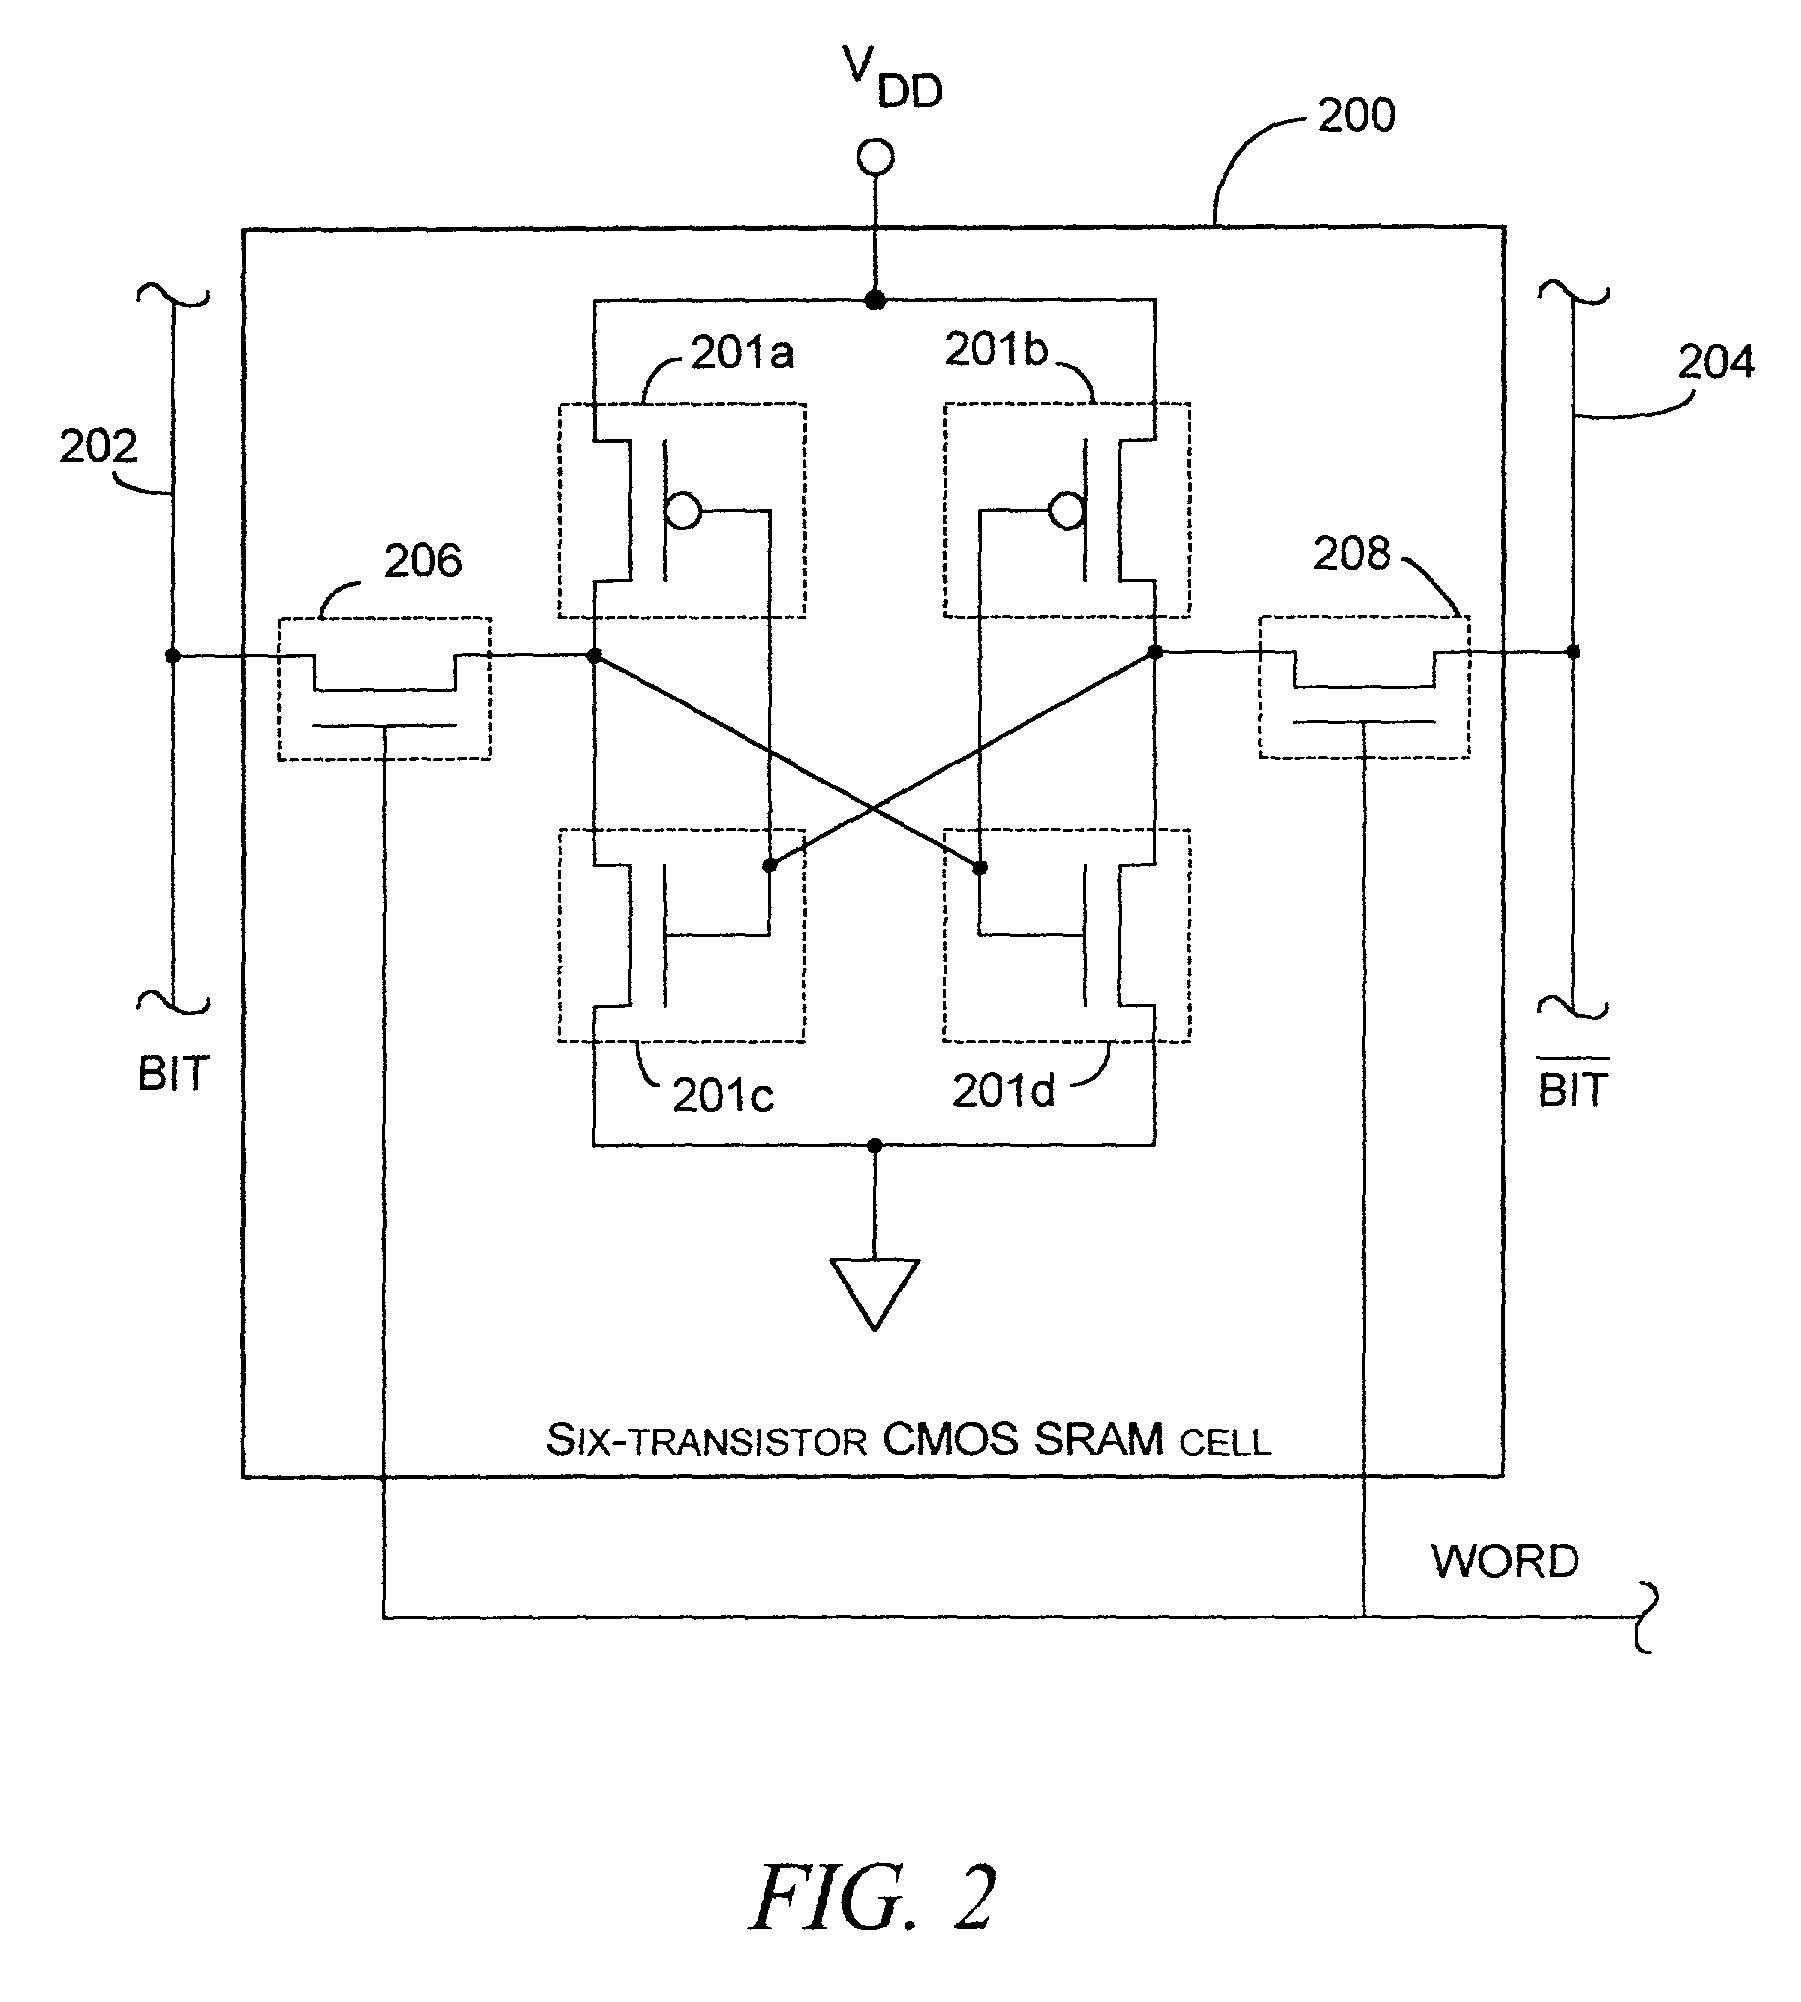 Memory architecture with single-port cell and dual-port (read and write) functionality